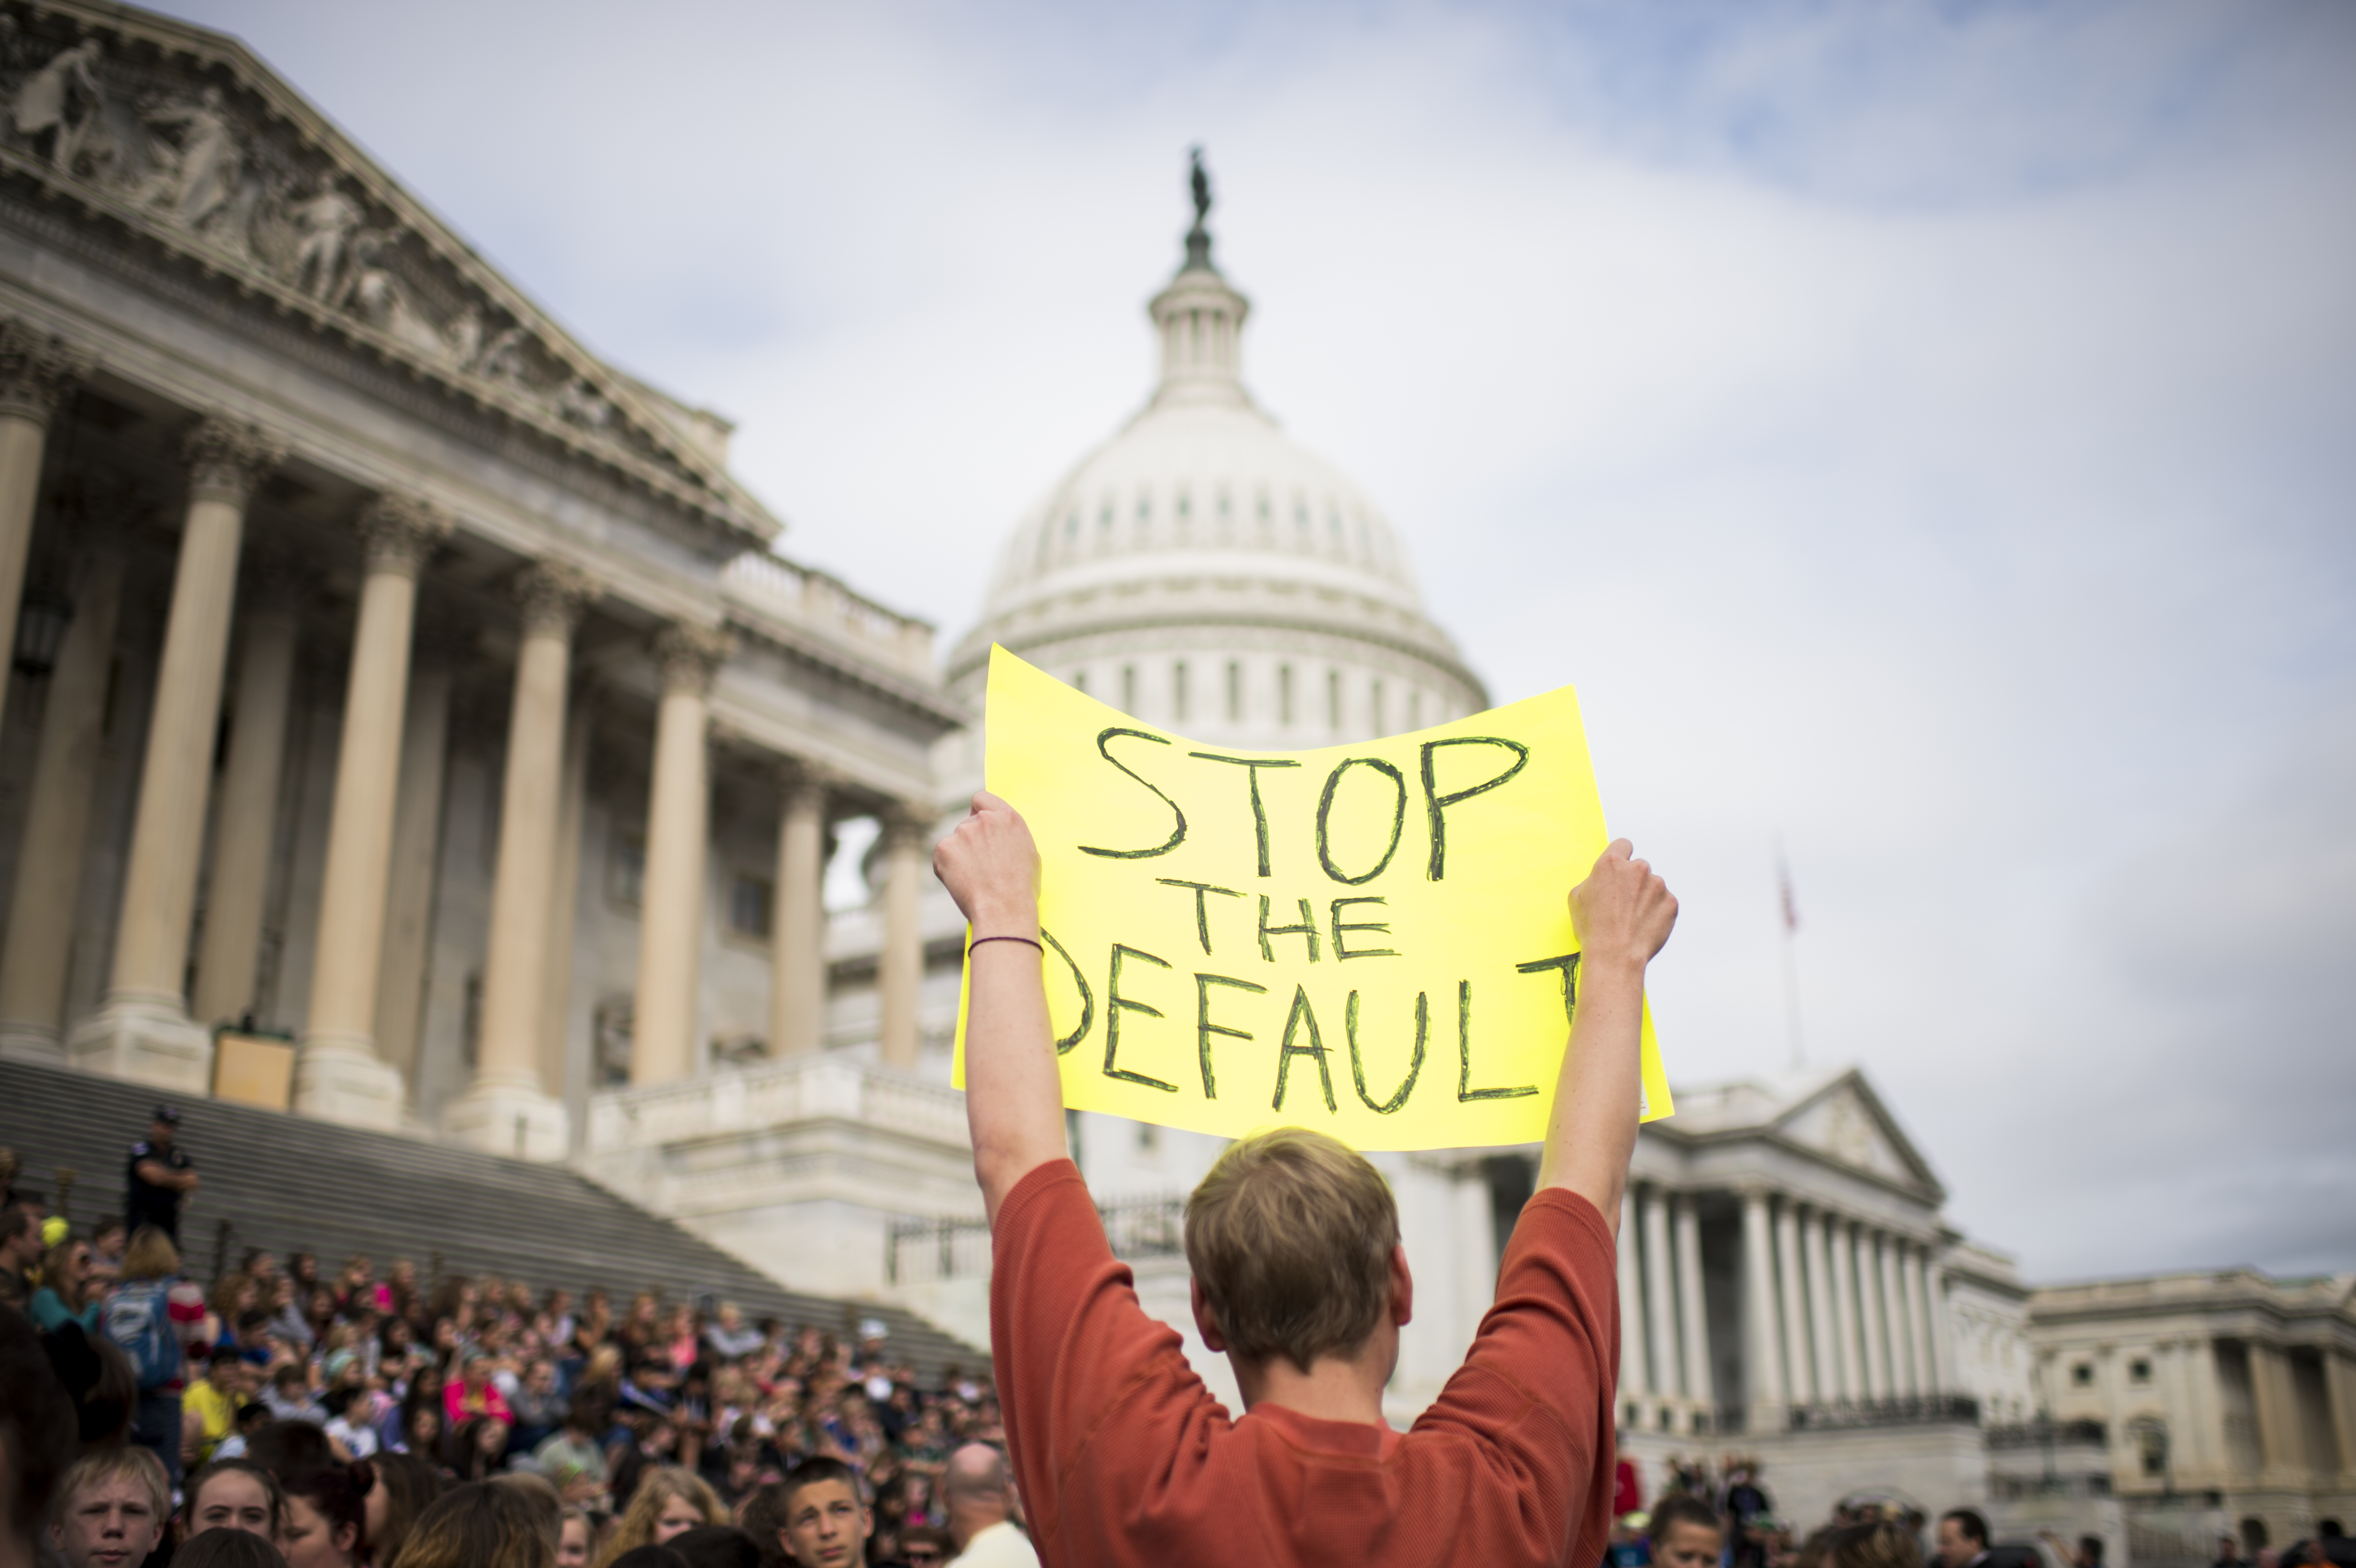 A protester holds up a sign that reads, “Stop the default” in front of the US Capitol building.